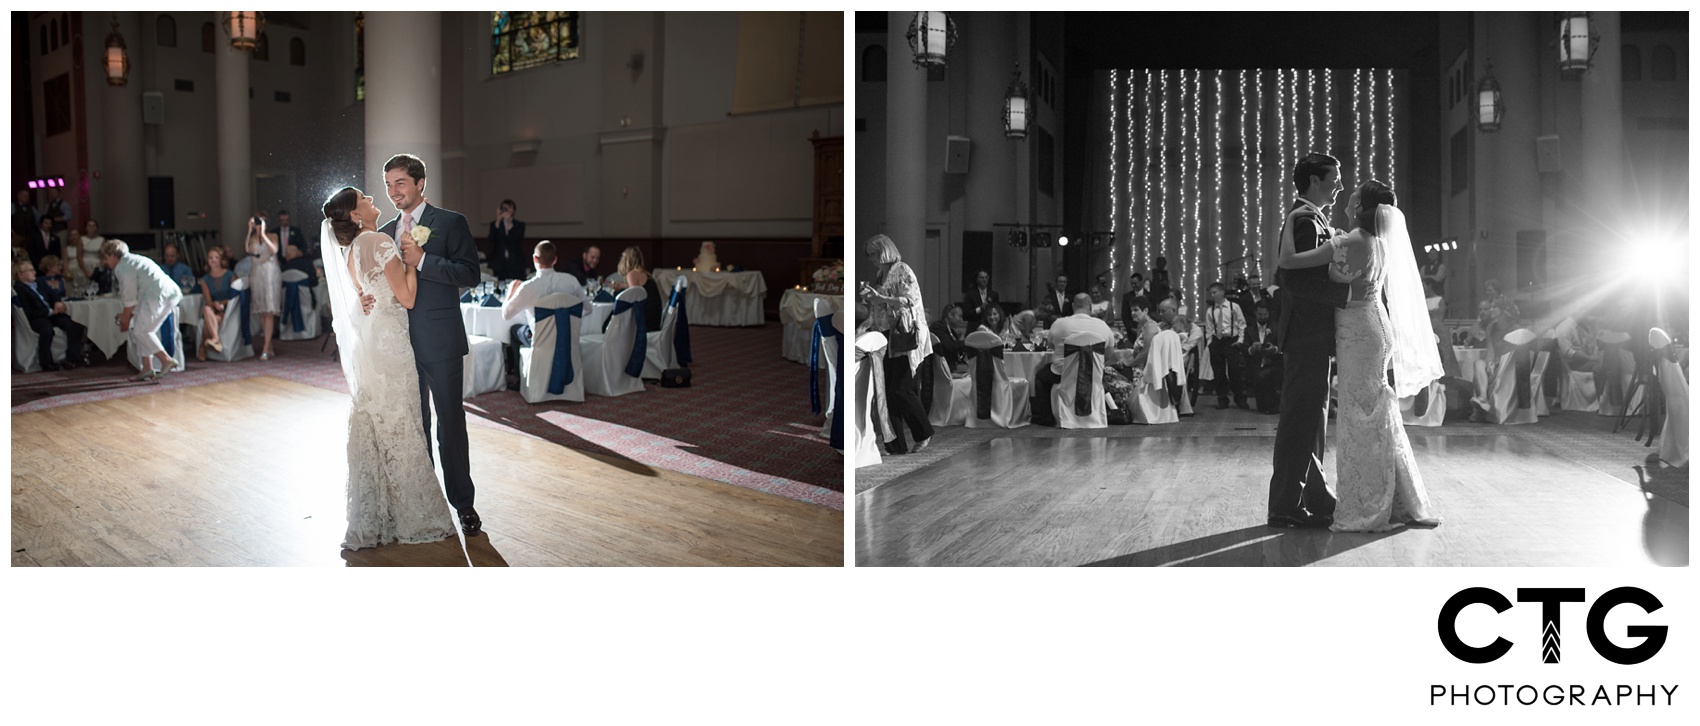 The_Grand_Hall_at_The_Priory_wedding-photos_0089